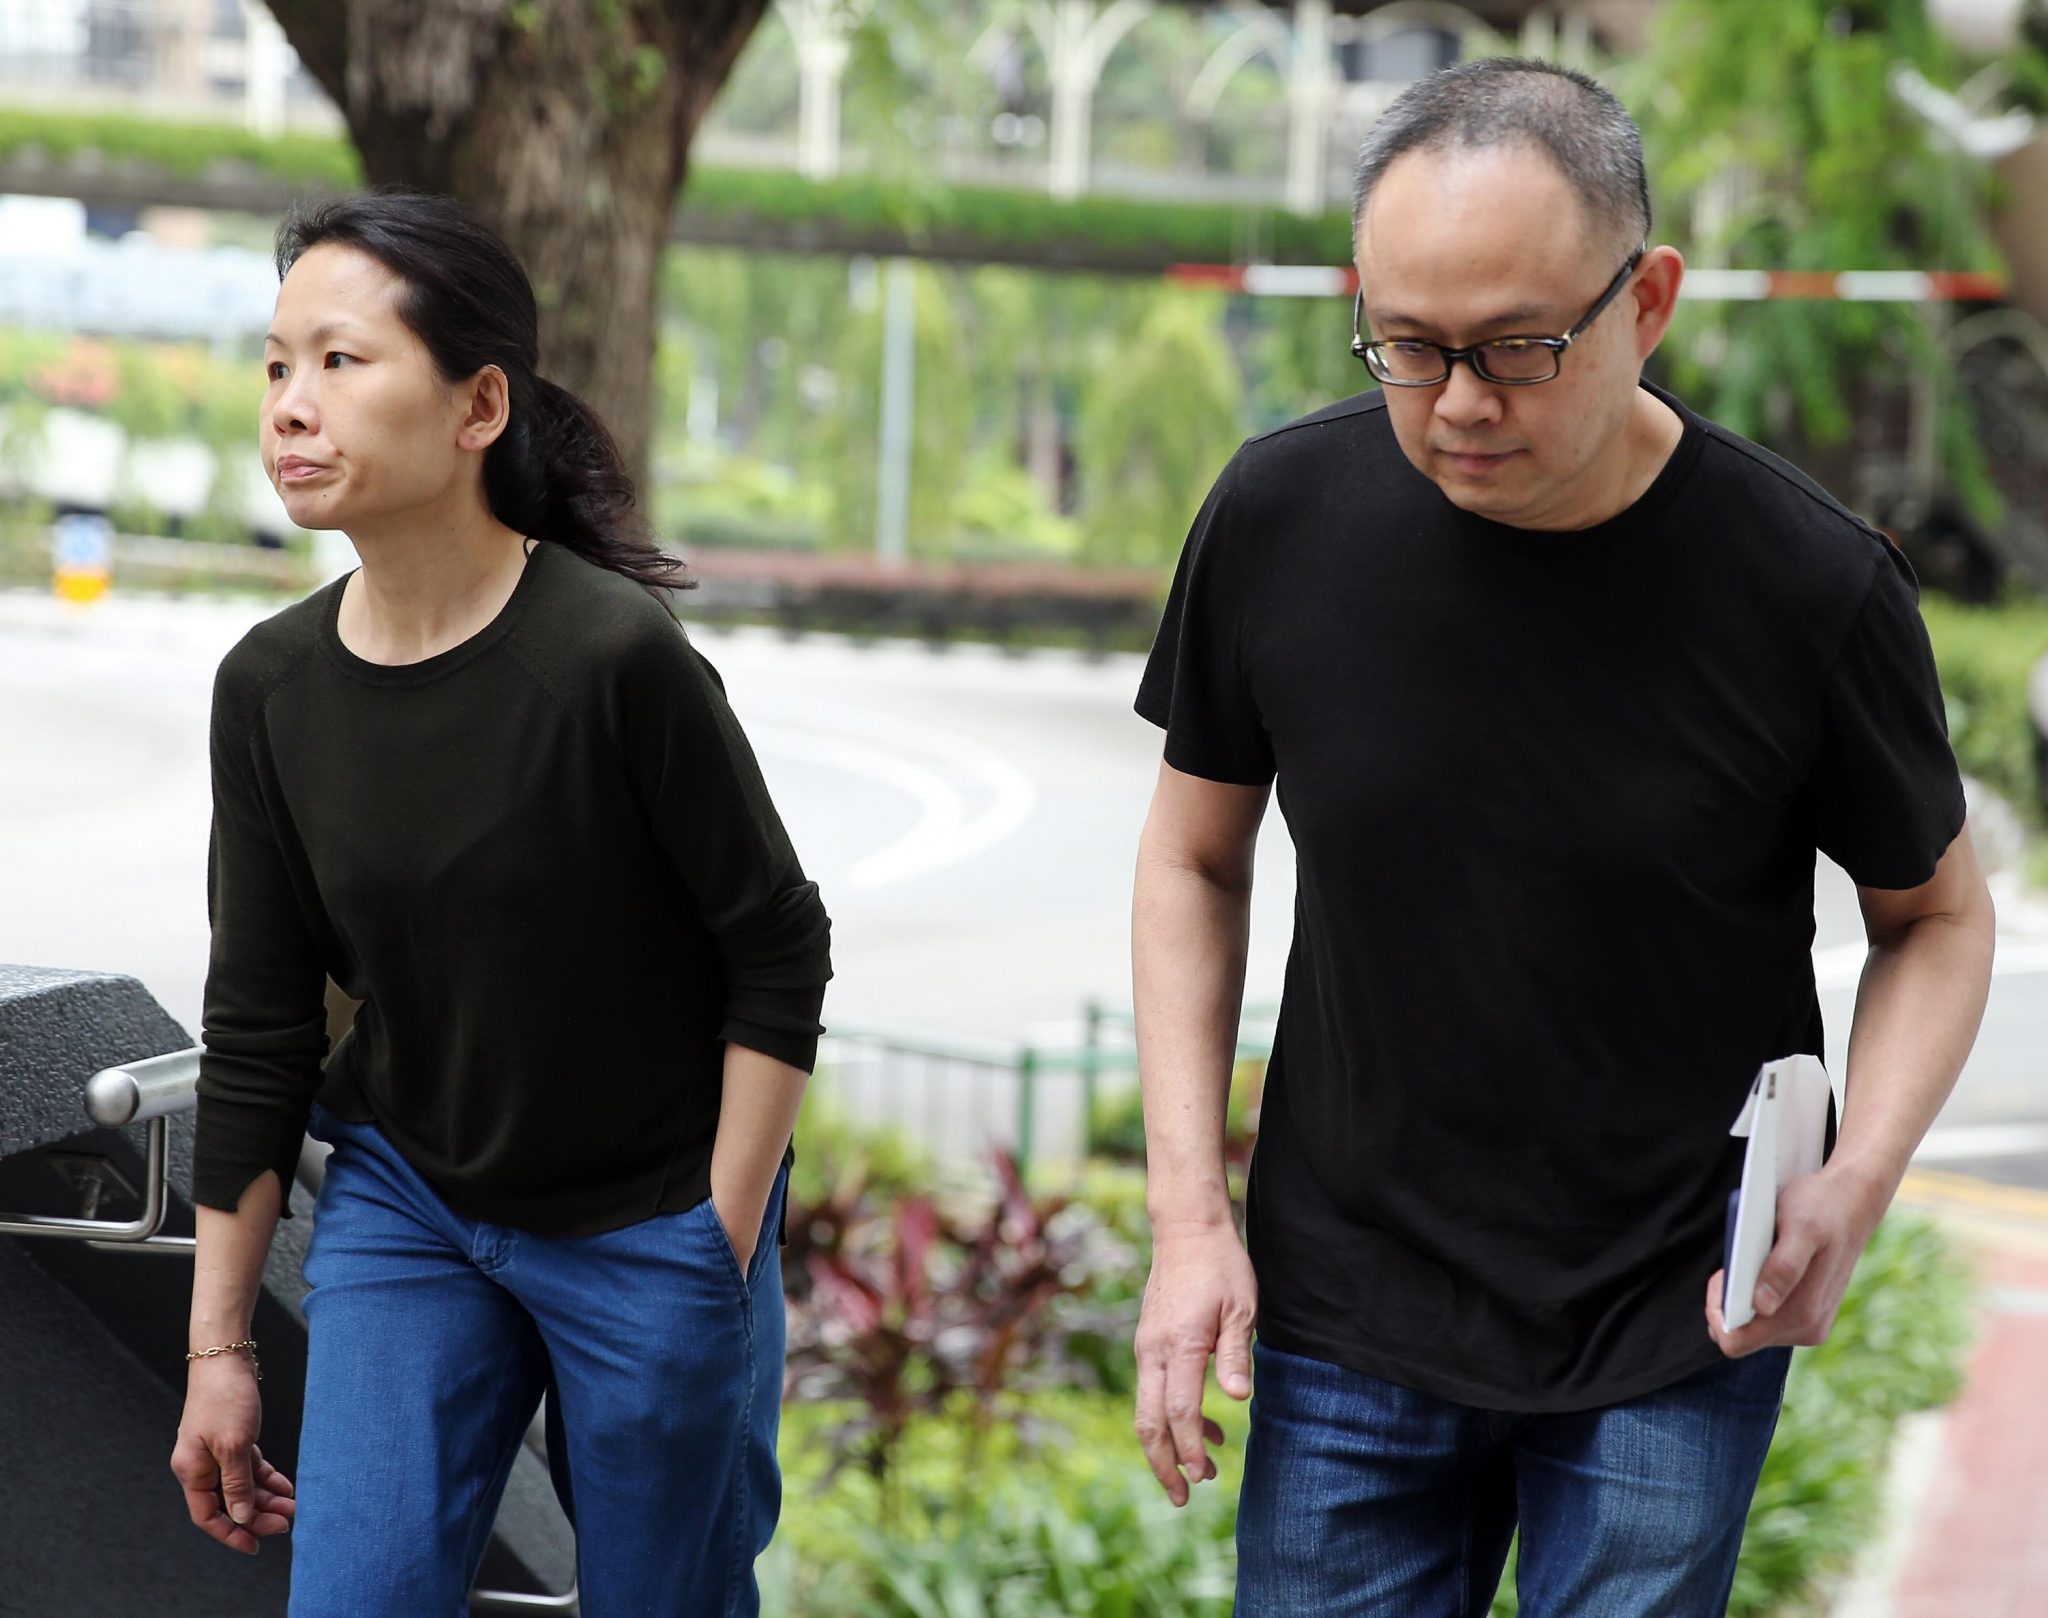 This photograph taken and released on March 27, 2017 by The Straits Times shows trader Lim Choon Hong (R) and his wife Chong Sui Foon (L) arriving at the state court in Singapore. A Singaporean couple, who starved their Philippine maid until her weight dropped to just 29 kilograms, were jailed, but state prosecutors asked for stiffer sentences. / AFP PHOTO / THE STRAITS TIMES / WONG KWAI CHOW / Singapore OUT / ---- EDITORS NOTE ----- RESTRICTED TO EDITORIAL USE MANDATORY CREDIT "AFP PHOTO / THE STRAITS TIMES / WONG KWAI CHOW" -- NO MARKETING -- NO ADVERTISING CAMPAIGNS - DISTRIBUTED AS A SERVICE TO CLIENTS -- NO ARCHIVES